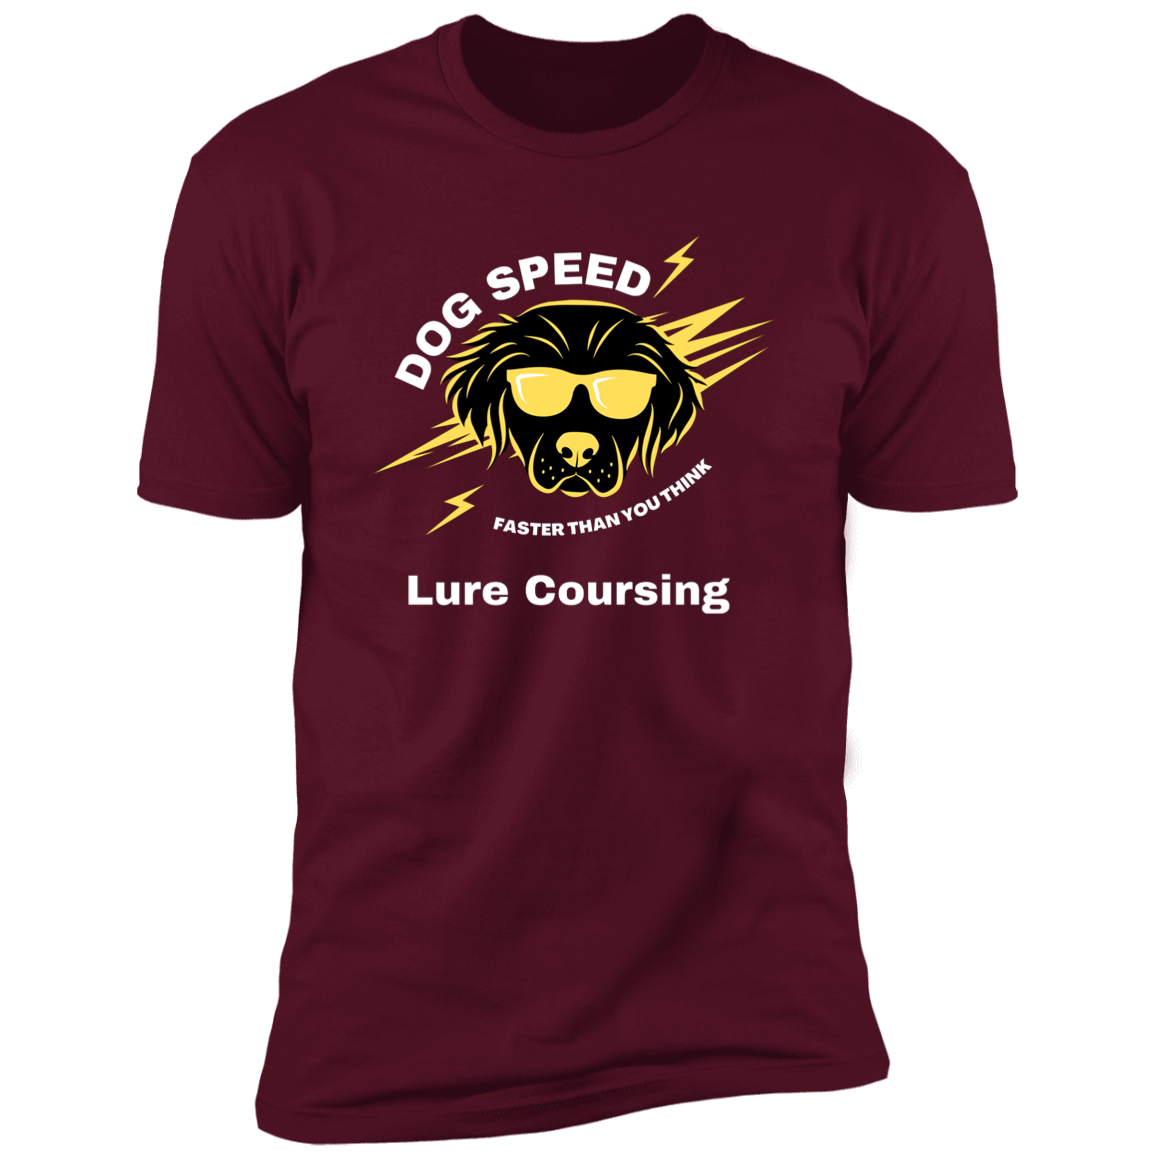 Dog Speed Faster Than You Think Lure Coursing T-shirt, Lure Coursing shirt dog shirt for humans, in maroon